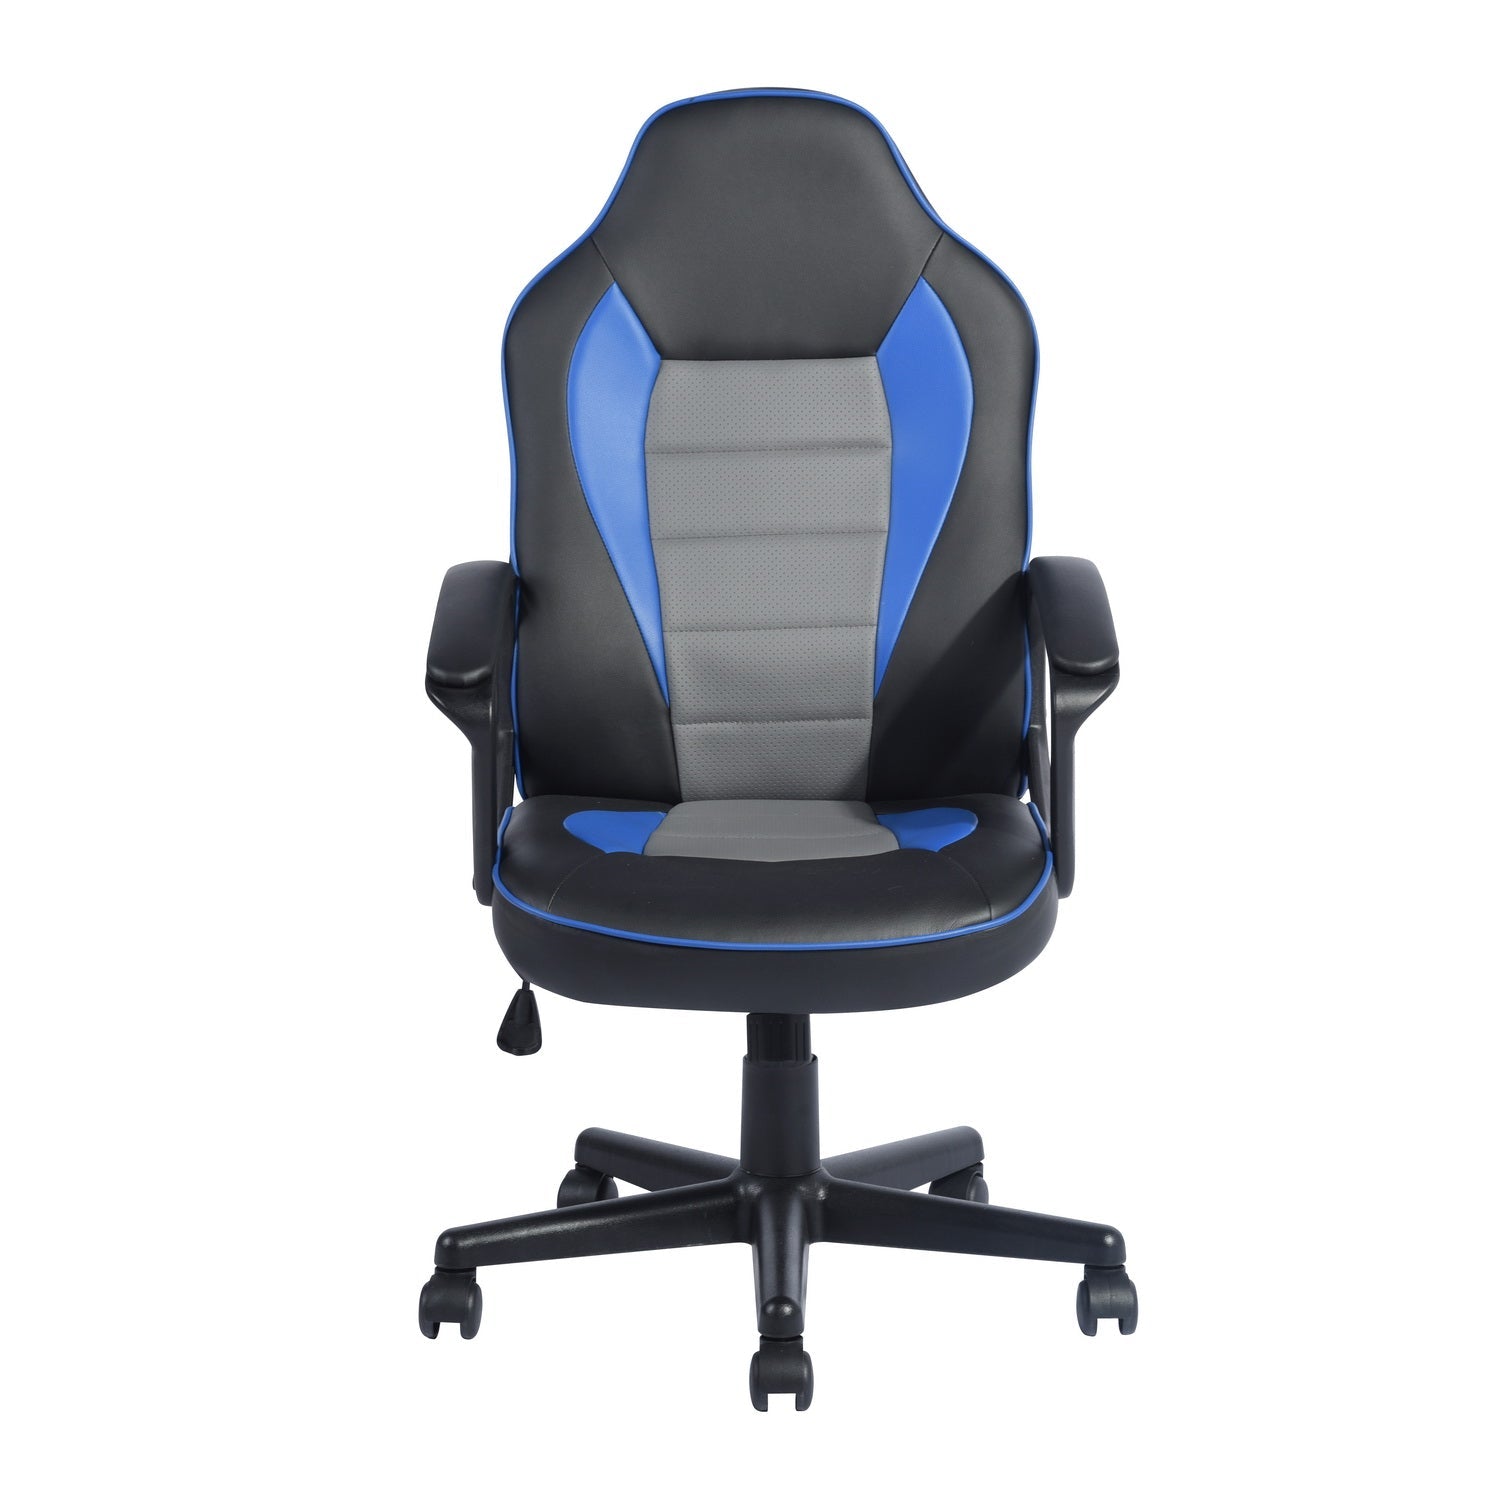 Terrell Blue Game Chairs